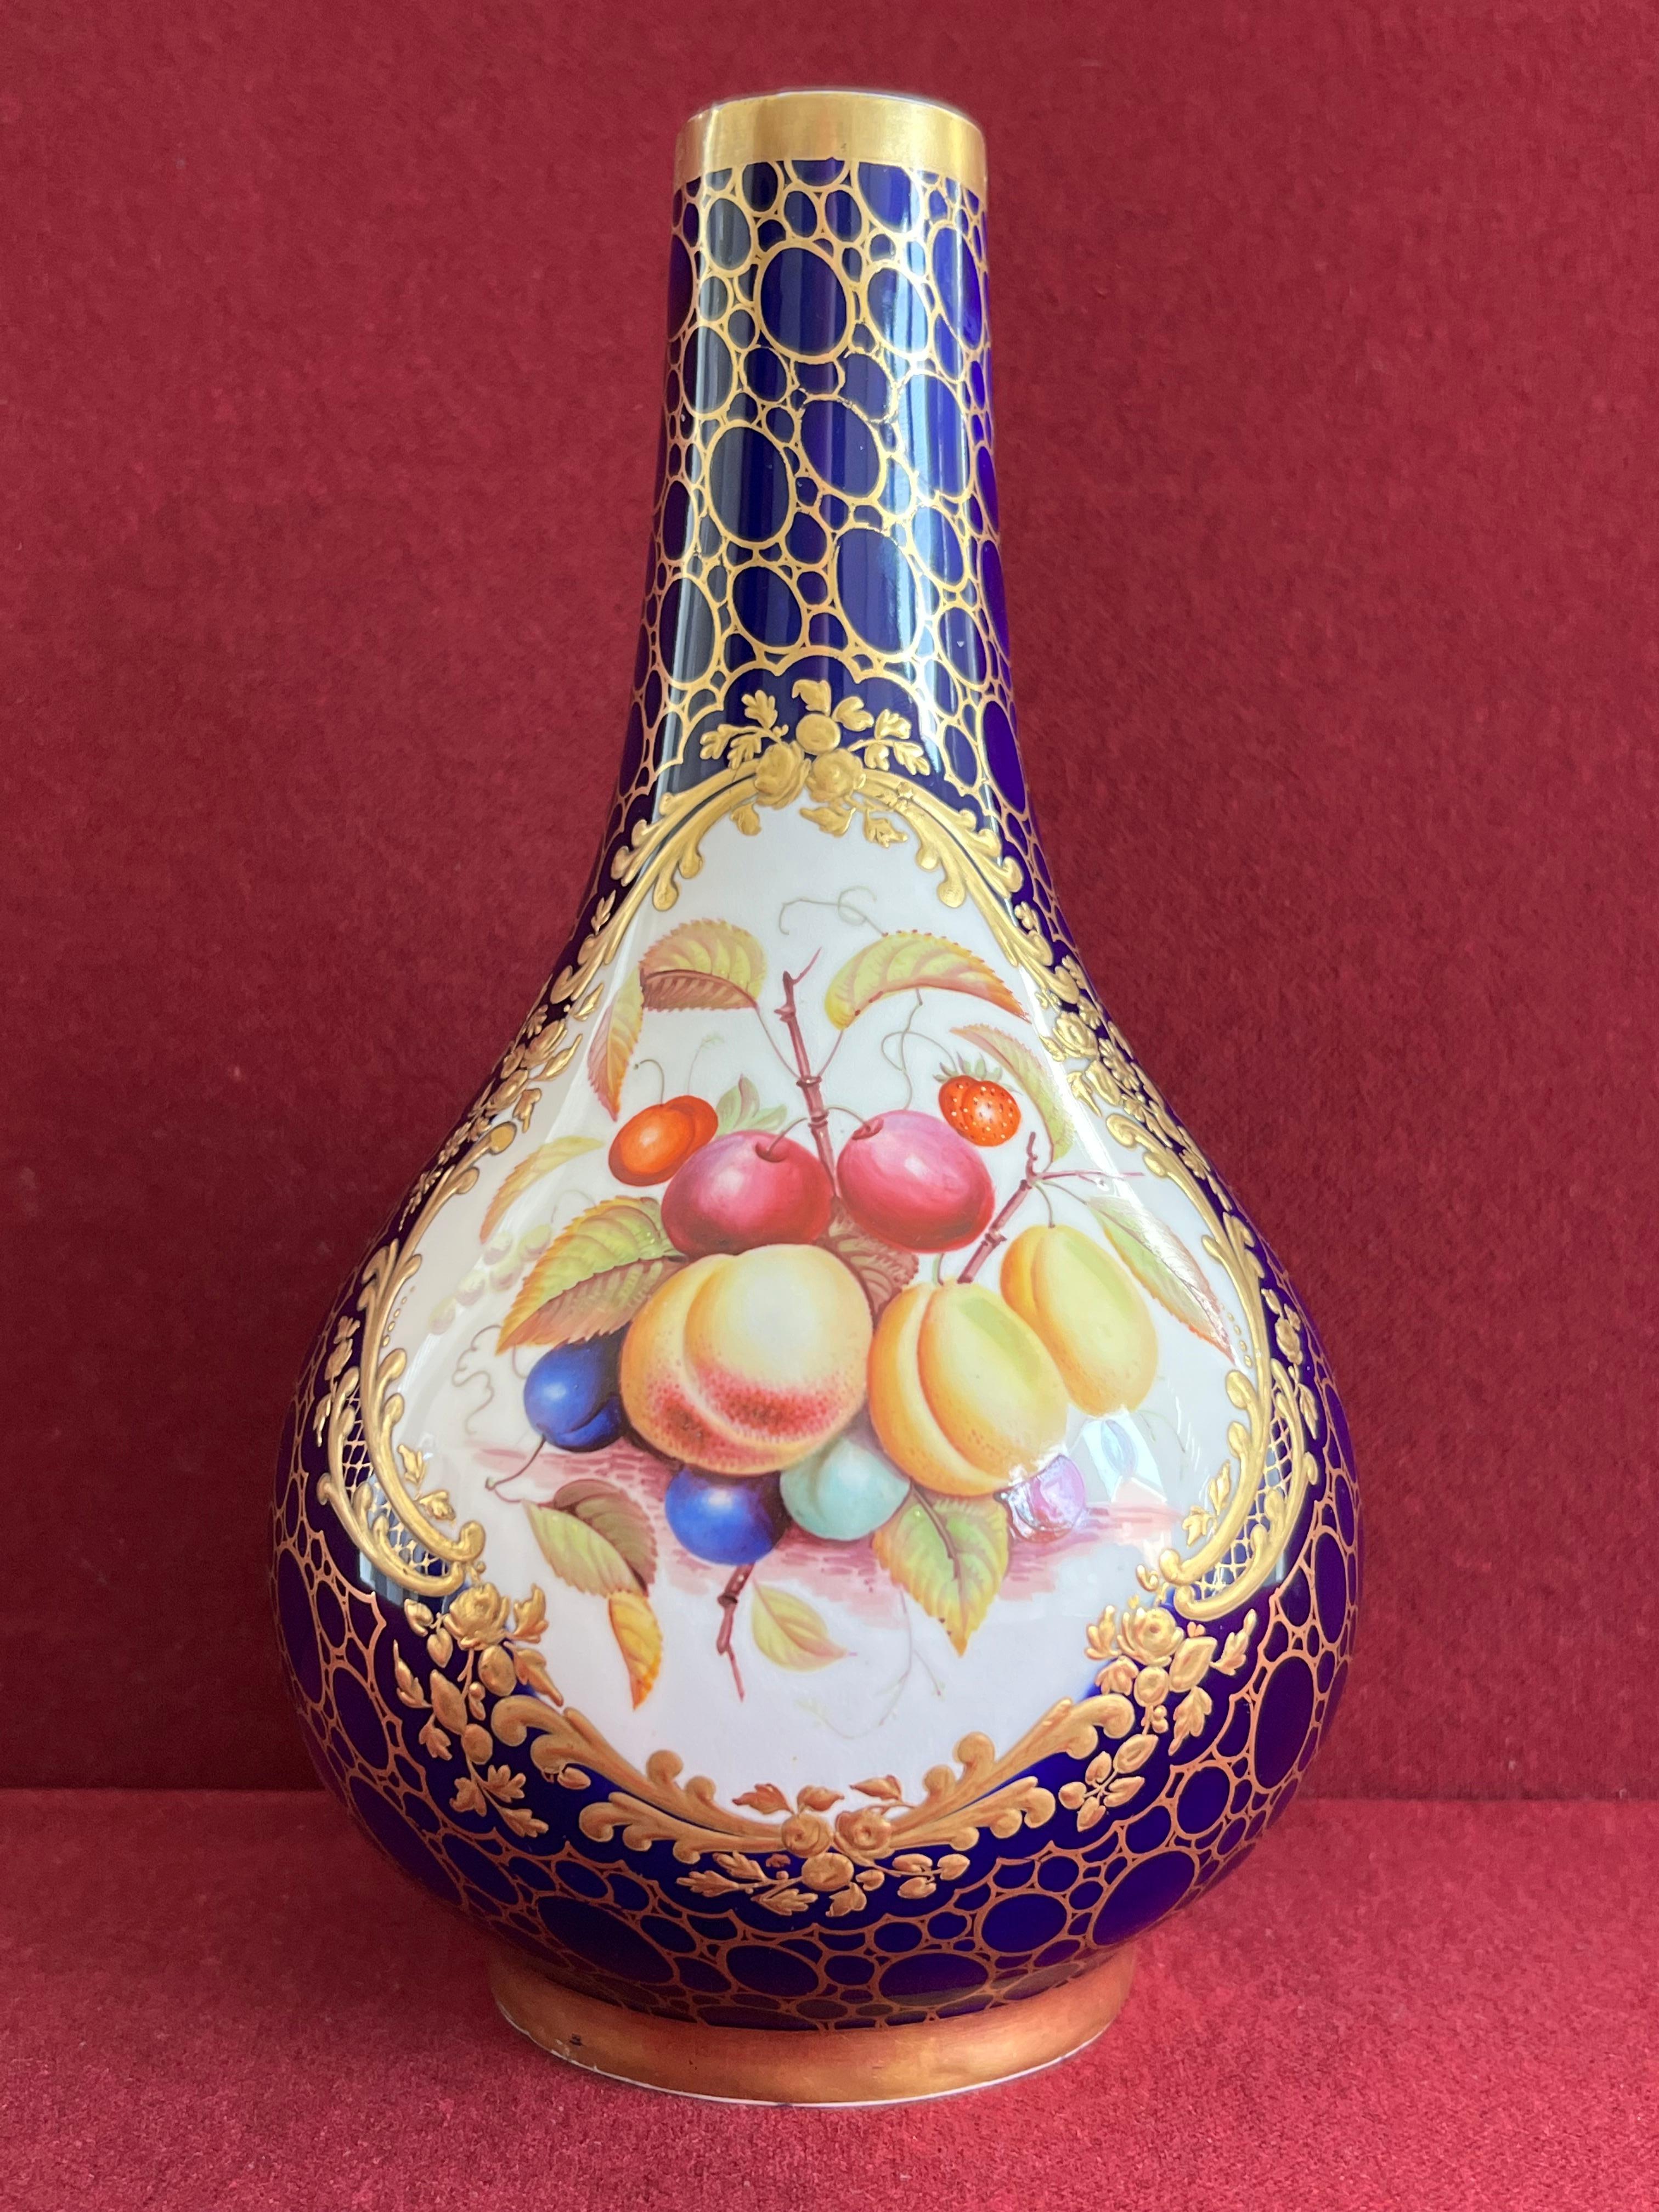 A fine Minton porcelain bottle shaped vase c.1840. Finely decorated with a panel containing painted fruits by Thomas Steel with a border of richly tooled gilding by John Robins in typical Minton’s Sevres-style, reserved on a deep cobalt ground